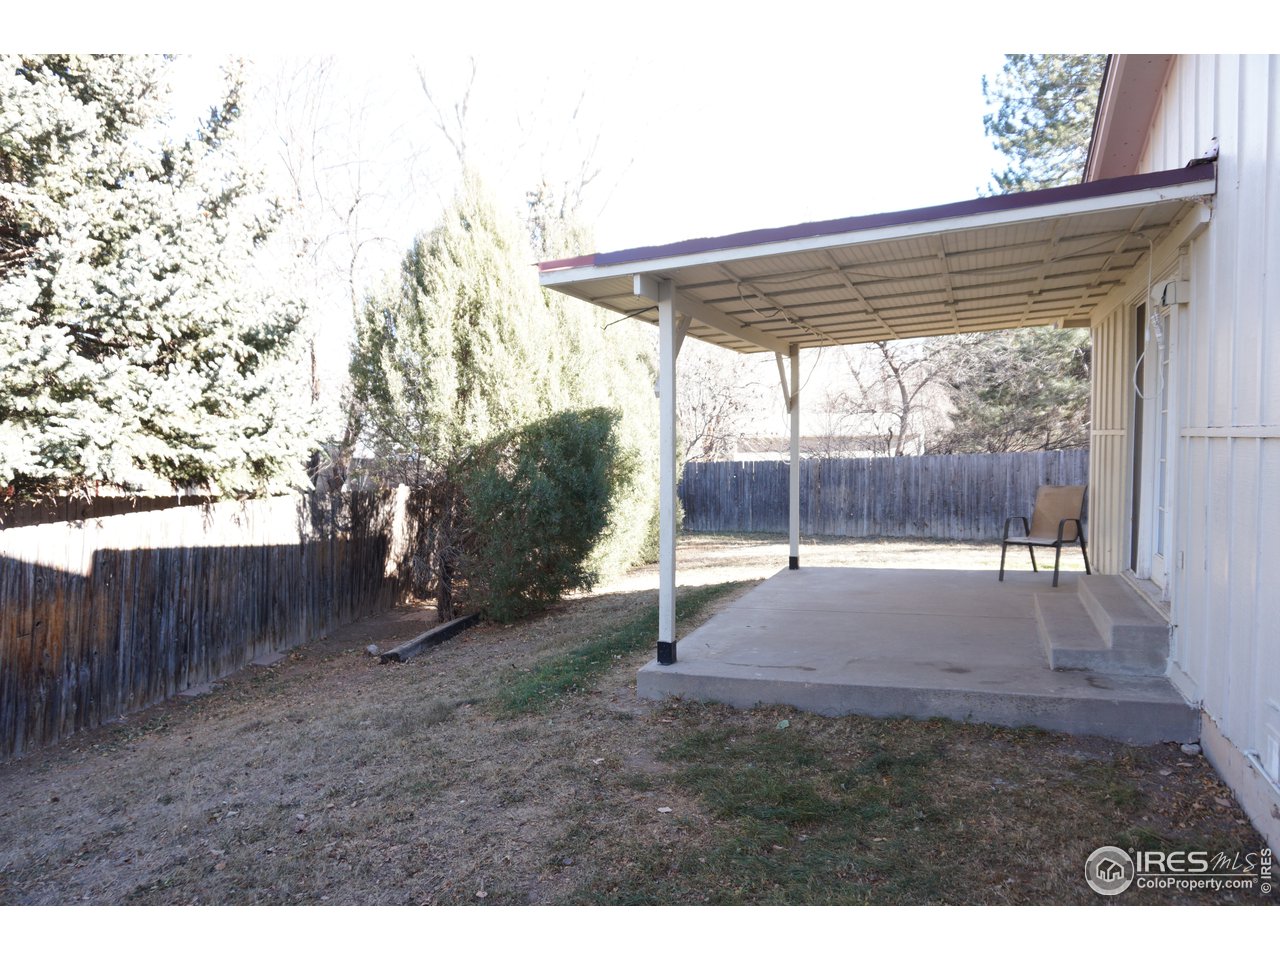 Covered Patio, Fenced Yard